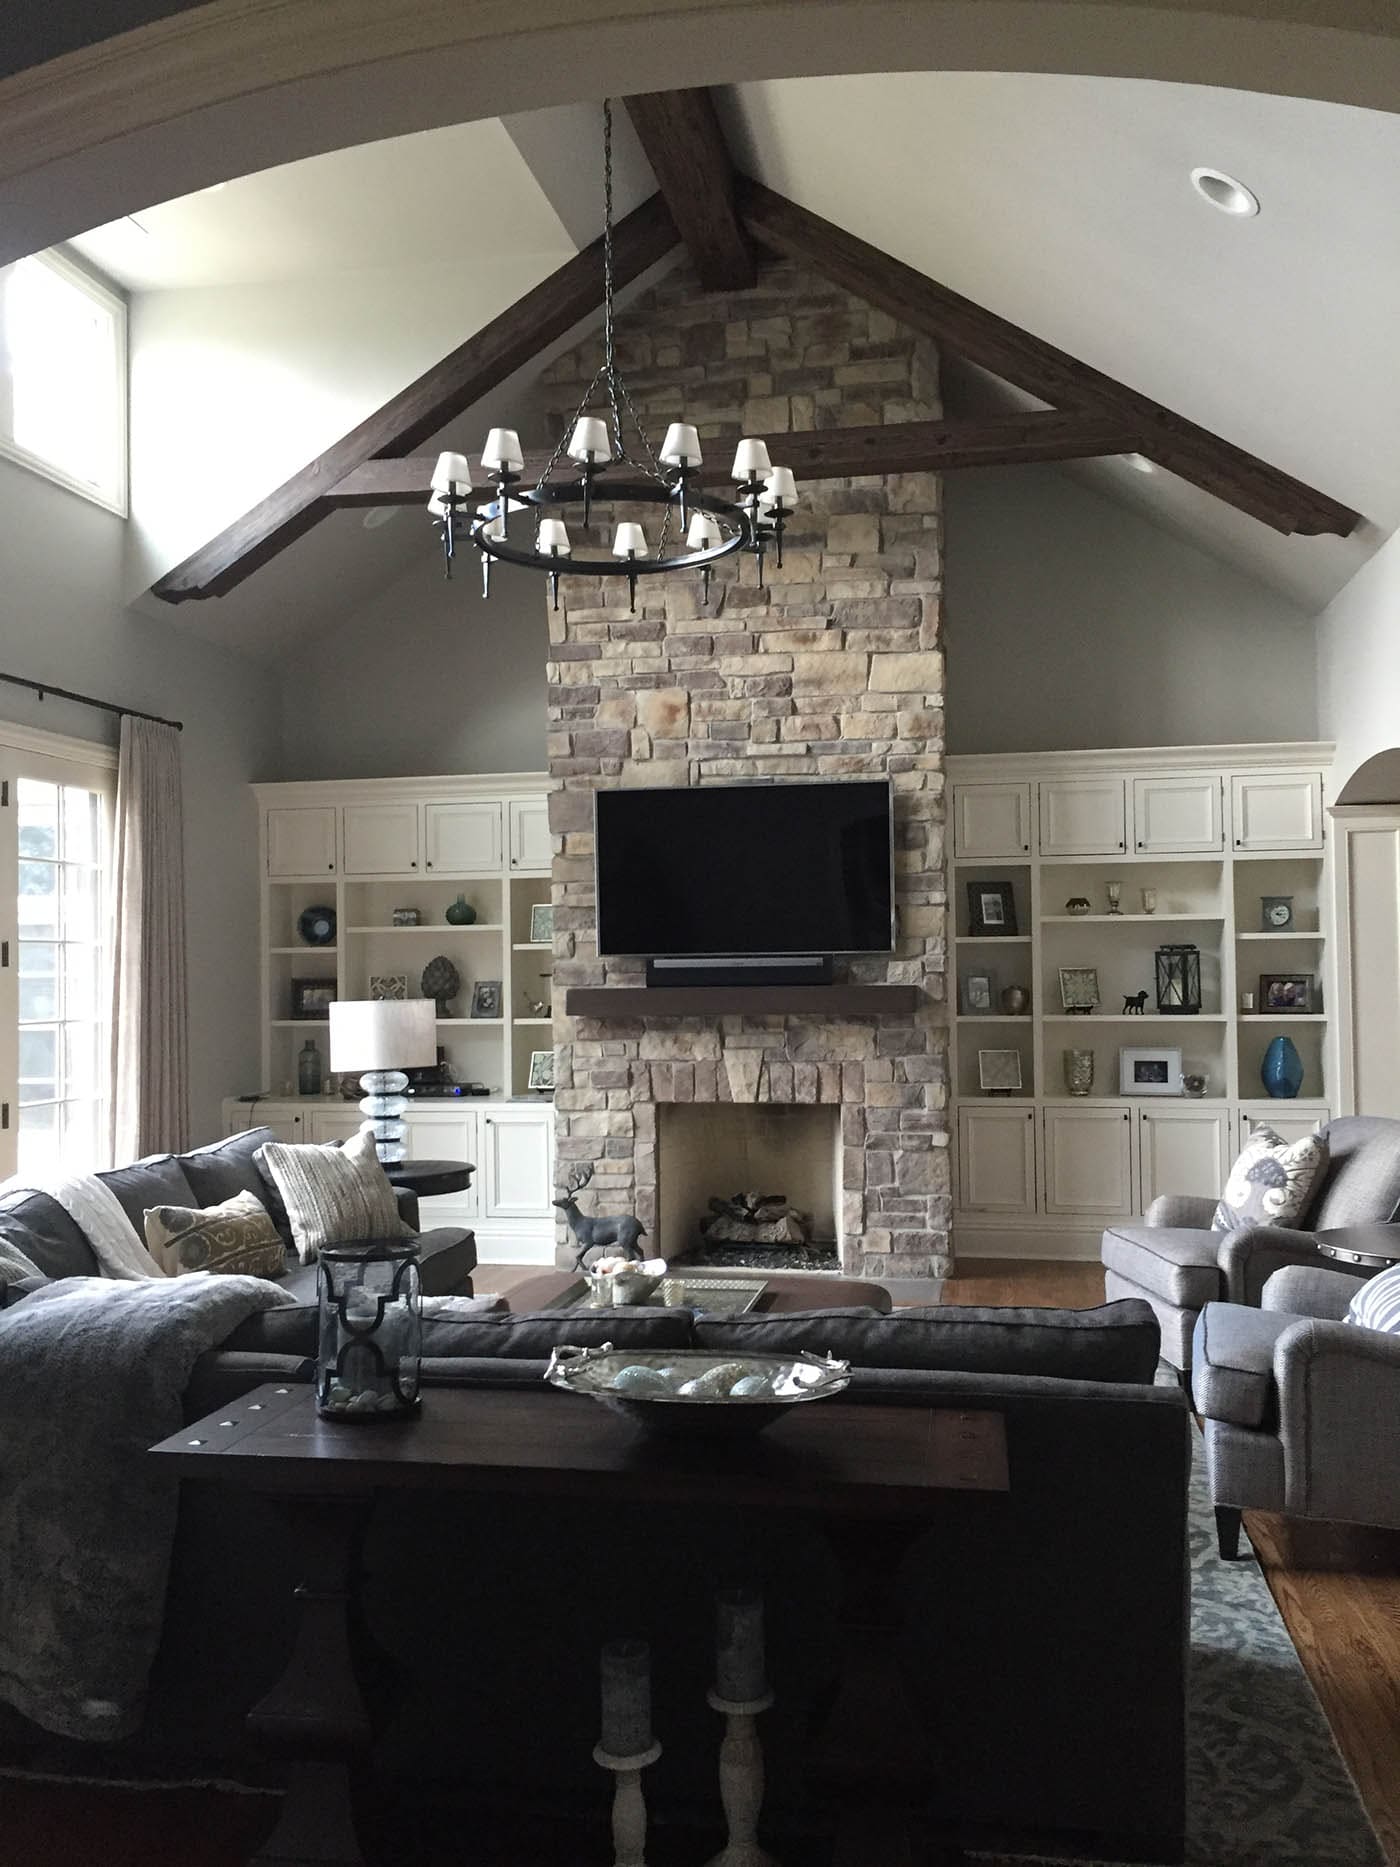 Faux wood ceiling trusses highlight the TV in a media room.